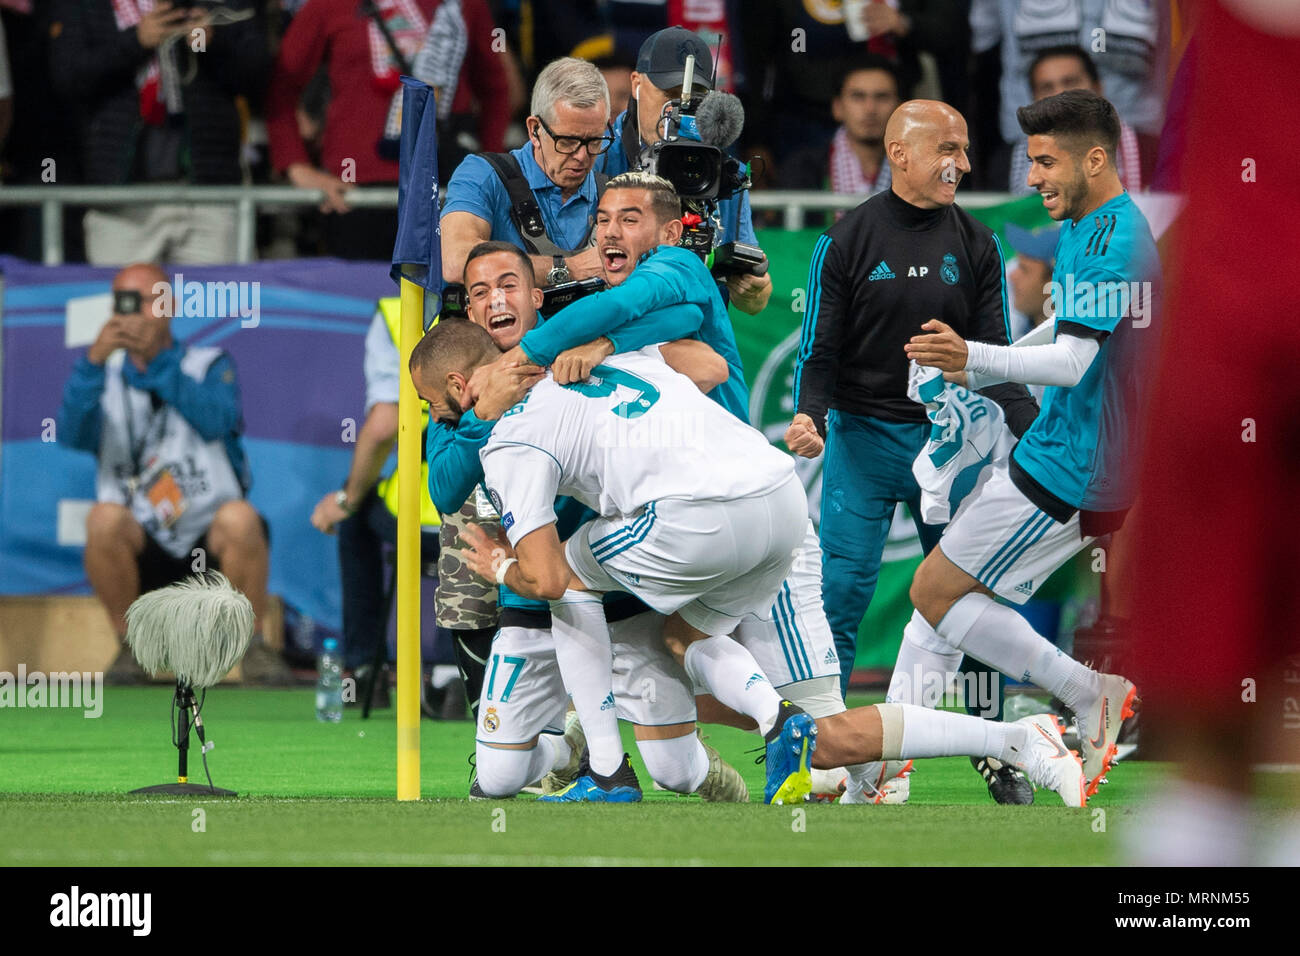 Karim Mostafa Benzema of Real Madrid celebrates after scoring his team's first goal    during the UEFA Champions League Final match between Real Madrid CF 3-1  Liverpool FC at NSC Olimpiyskiy Stadium in Kiev, Ukraine, on May 26, 2018. (Photo by Maurizio Borsari/AFLO) Stock Photo